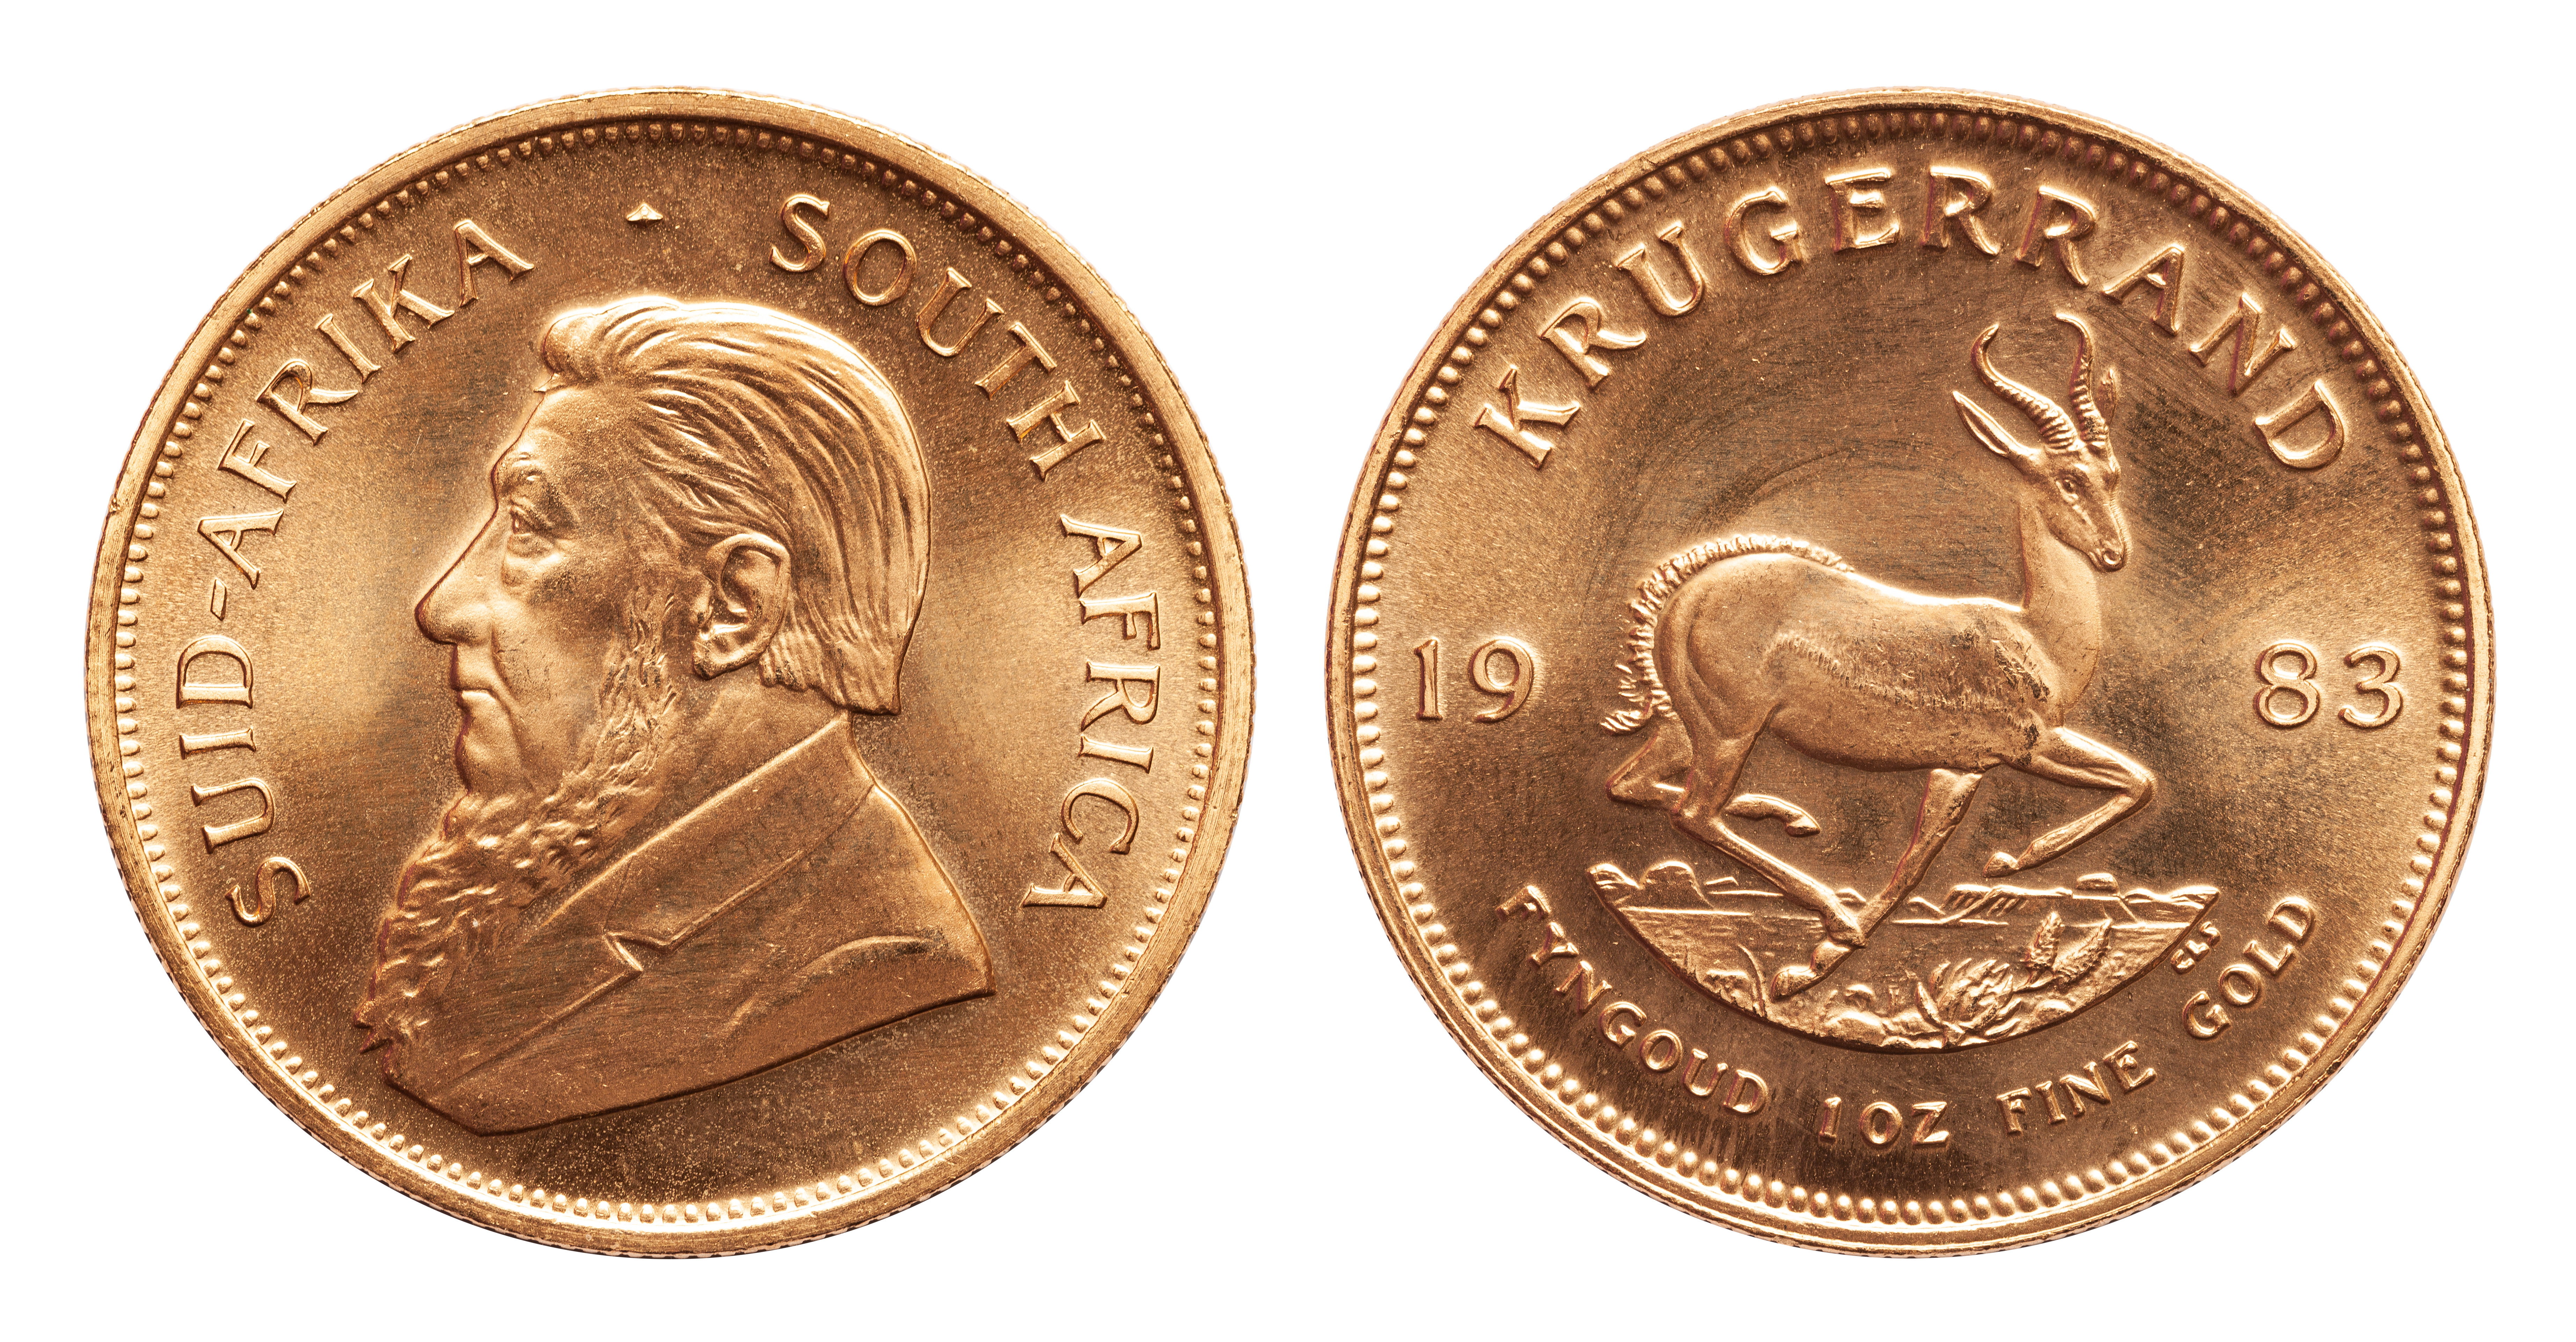 1 Ounce Gold South African Krugerrand